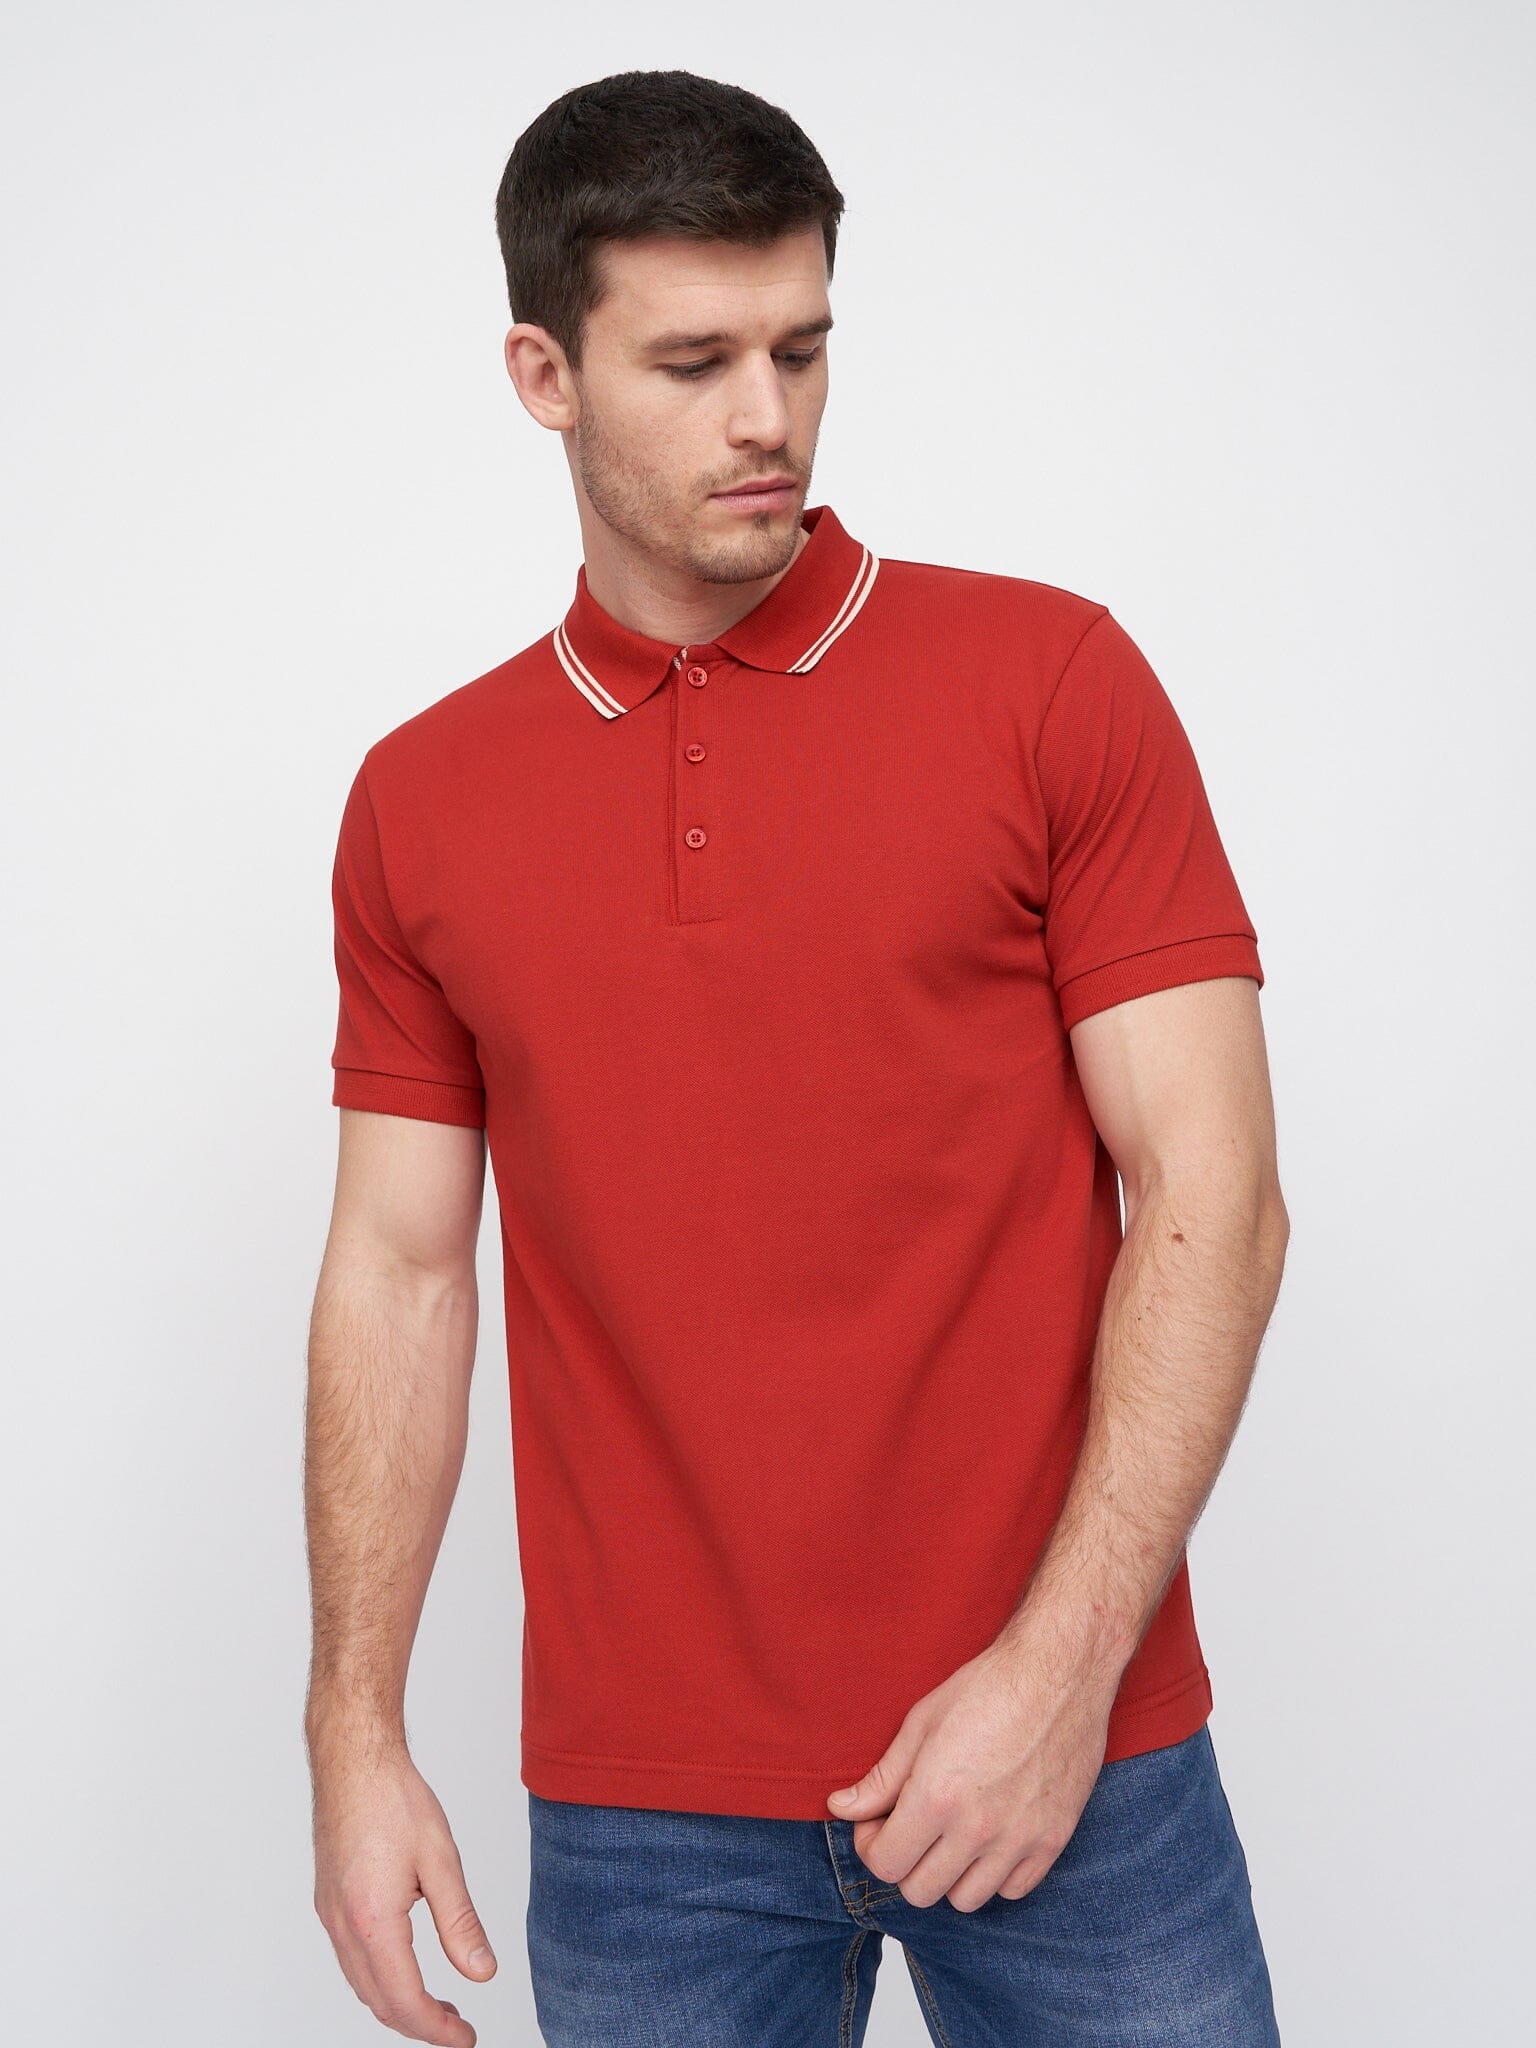 Samtrase Polo Red